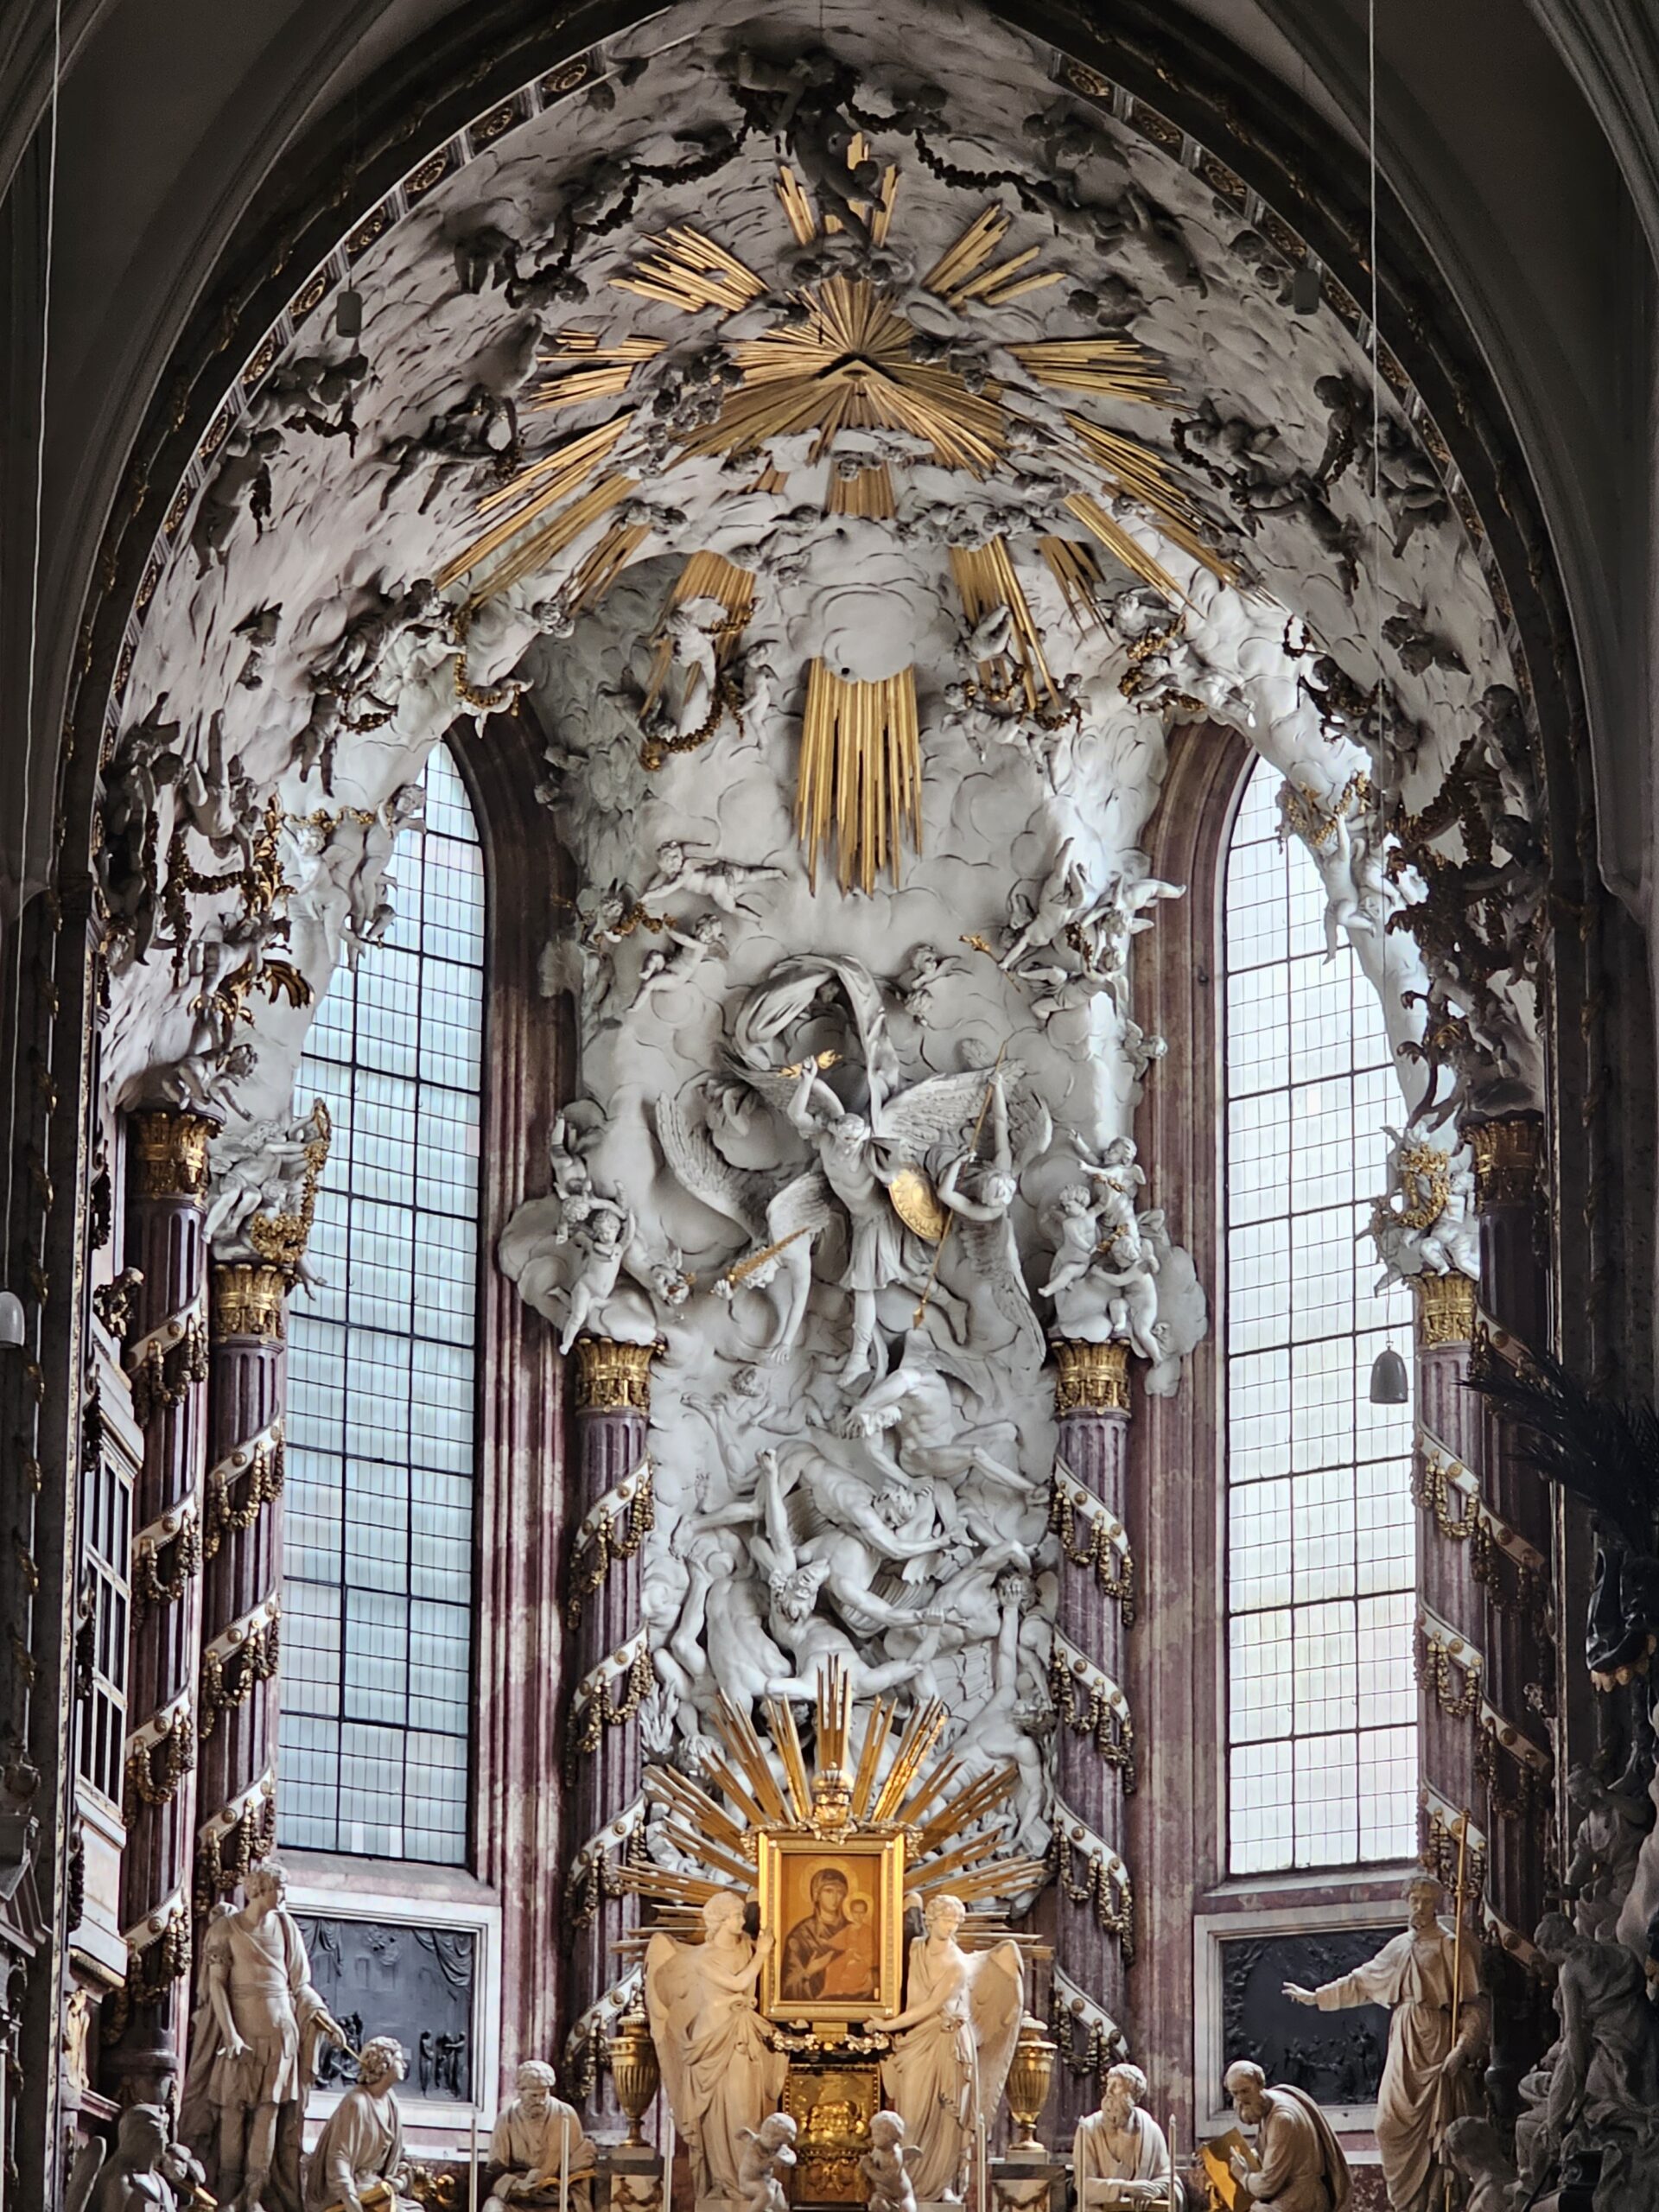 The Altar at St Stephen's Cathedral, Vienna